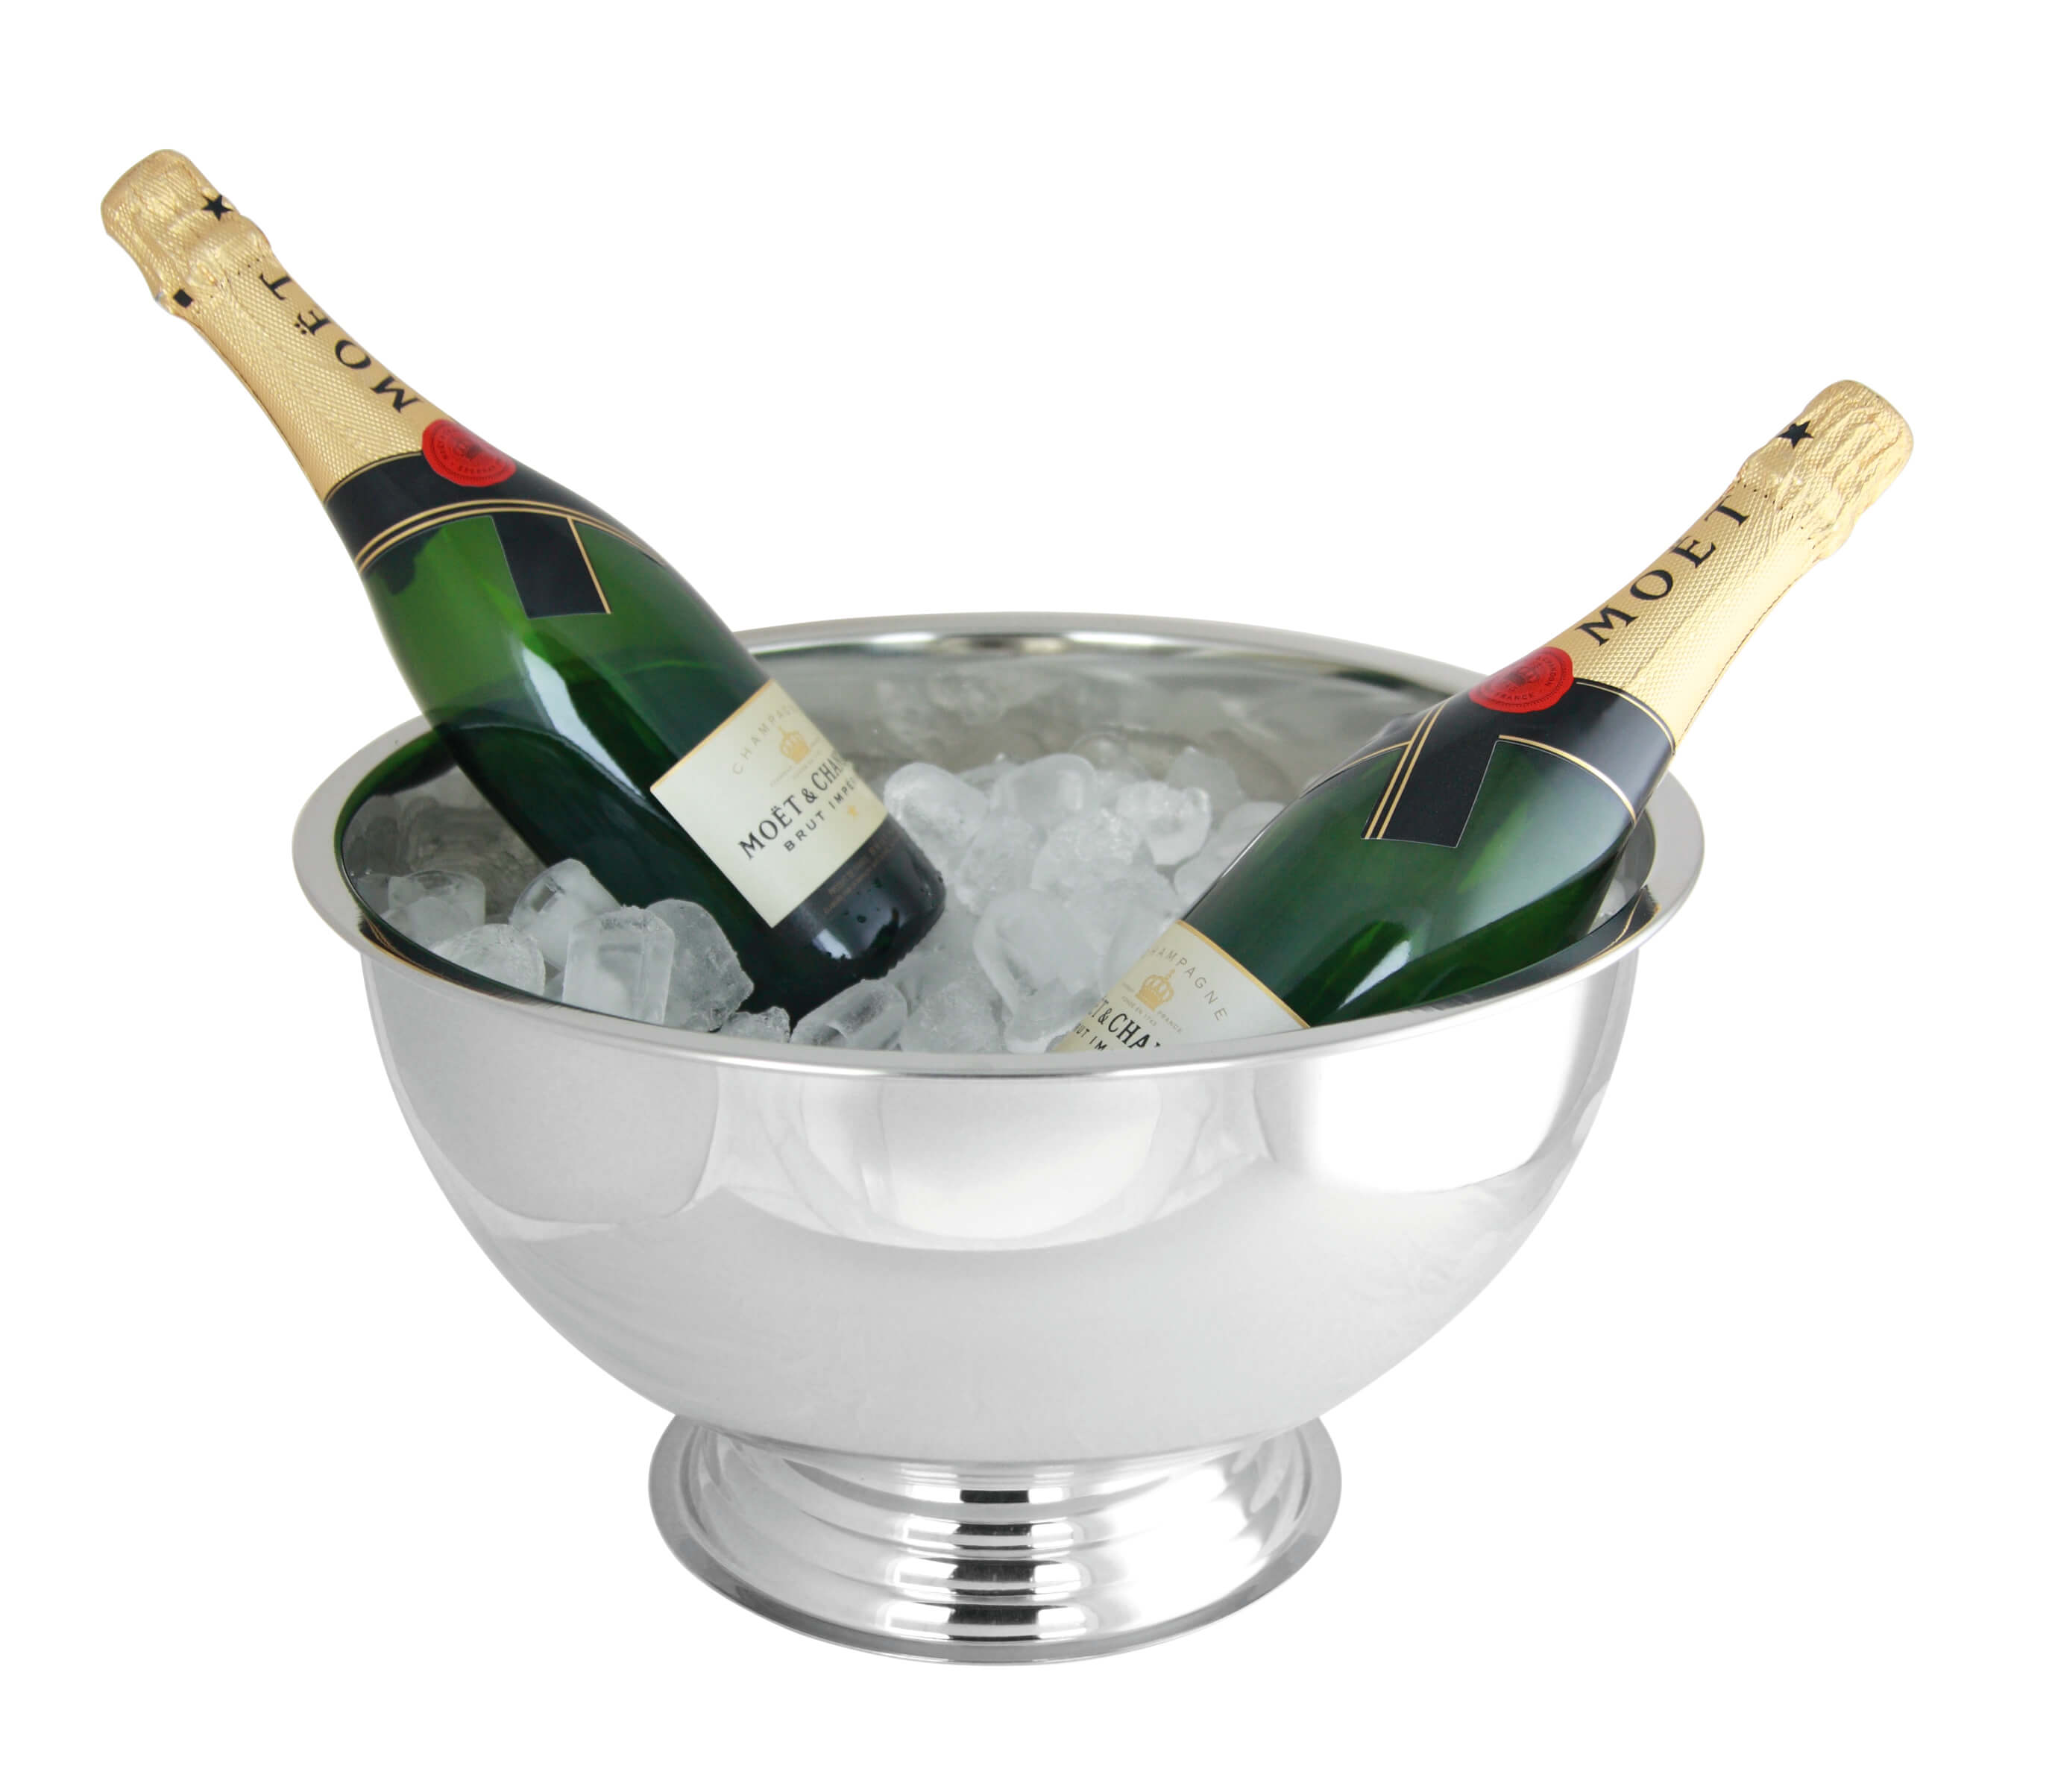 Champagne cooler - stainless steel, 35cm